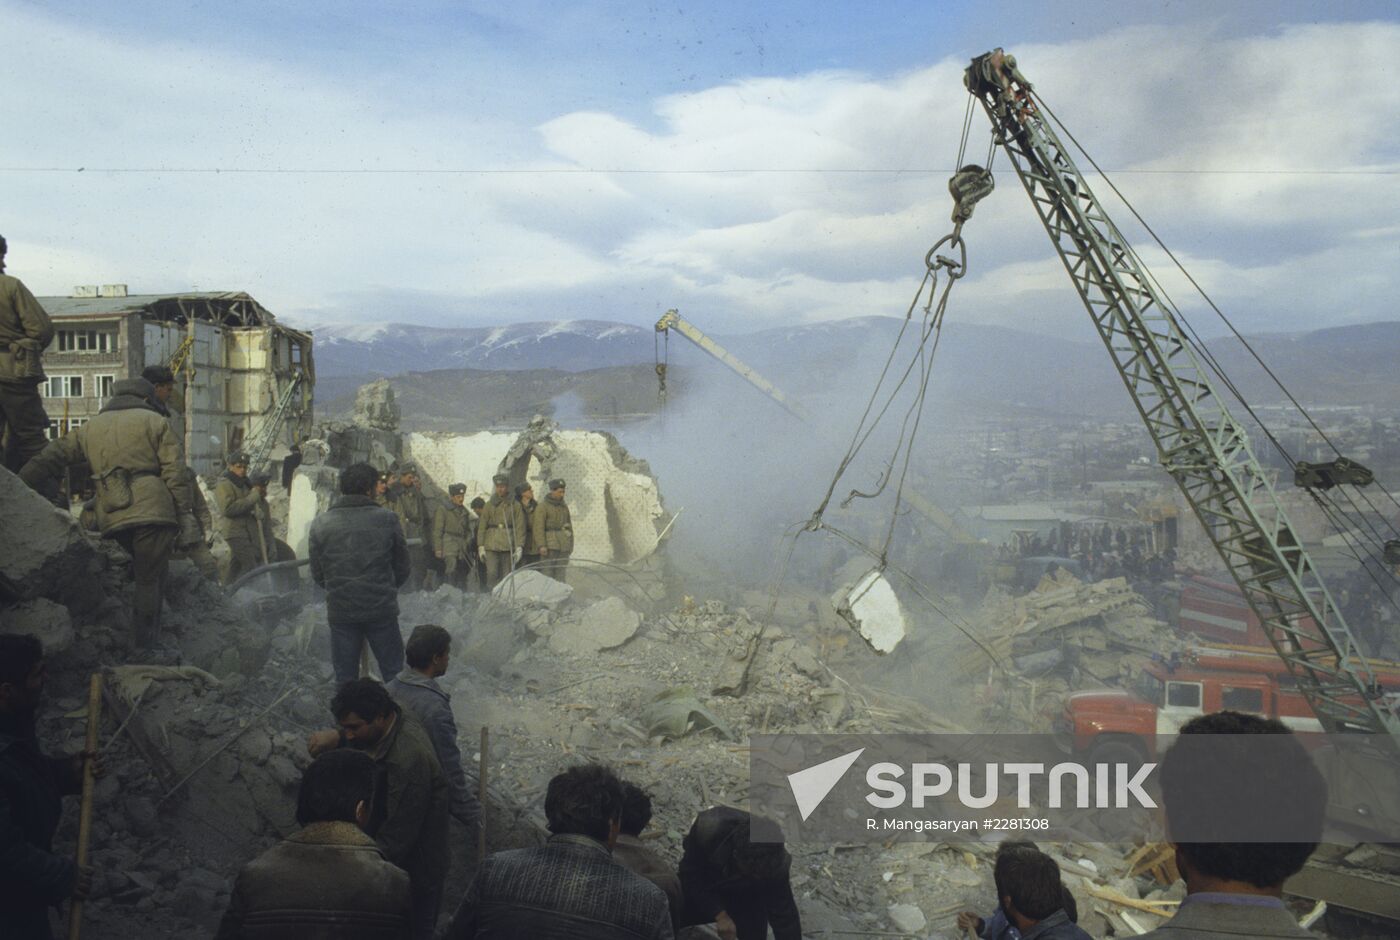 Consequences of earthquake in Armenia